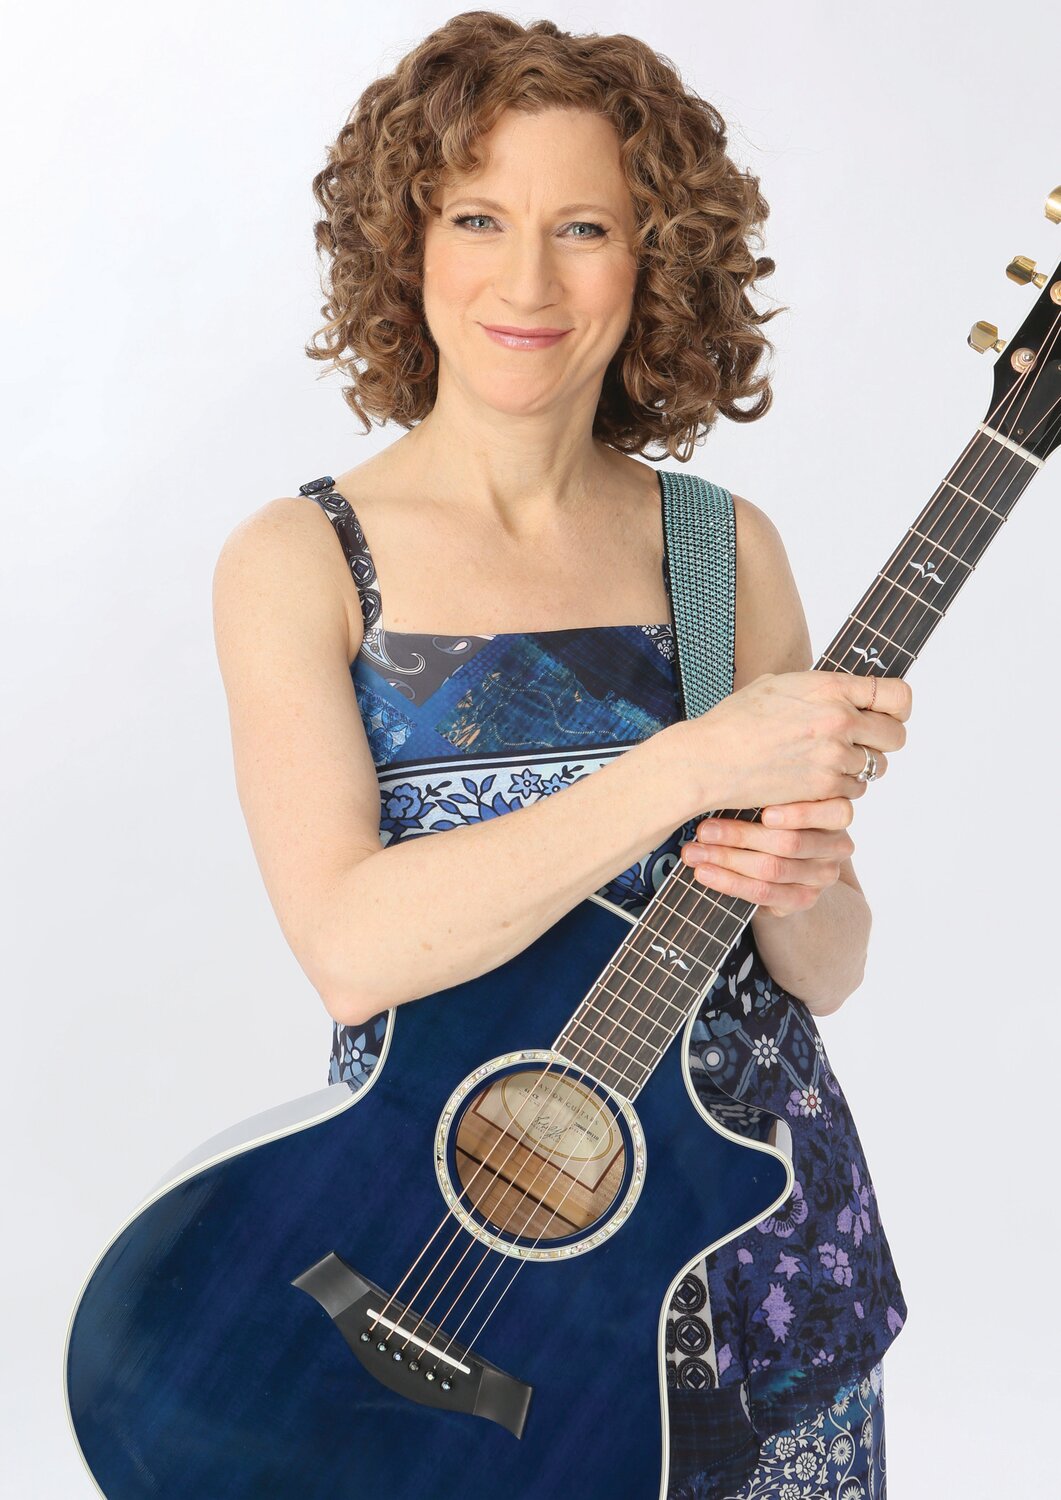 Children’s musician Laurie Berkner will play at the 40th annual New Jersey Lottery Festival of Ballooning.